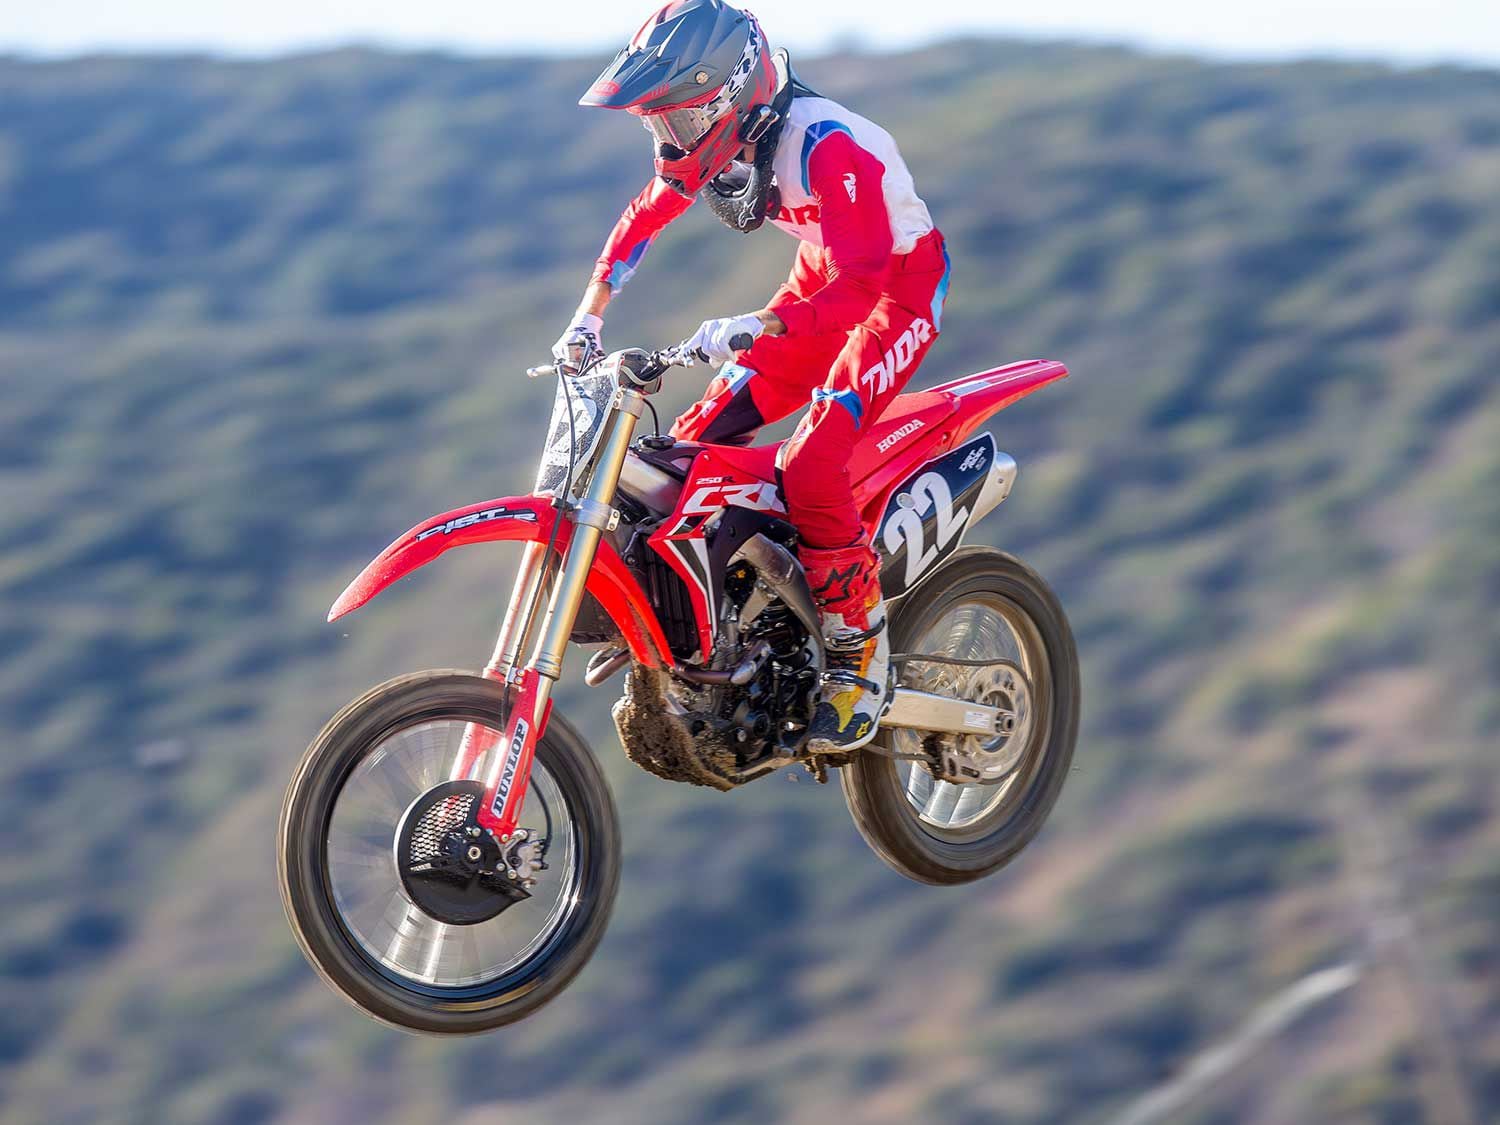 “In addition to its suspension lacking some suppleness in the initial part of the stroke, the CRF250R’s chassis has a slightly rigid feel as well—the combination of which make it fun to ride on a smooth track with lots of corners, but not as enjoyable or predictable on a rough and gnarly track like Glen Helen.” <em>—Andrew Oldar</em>